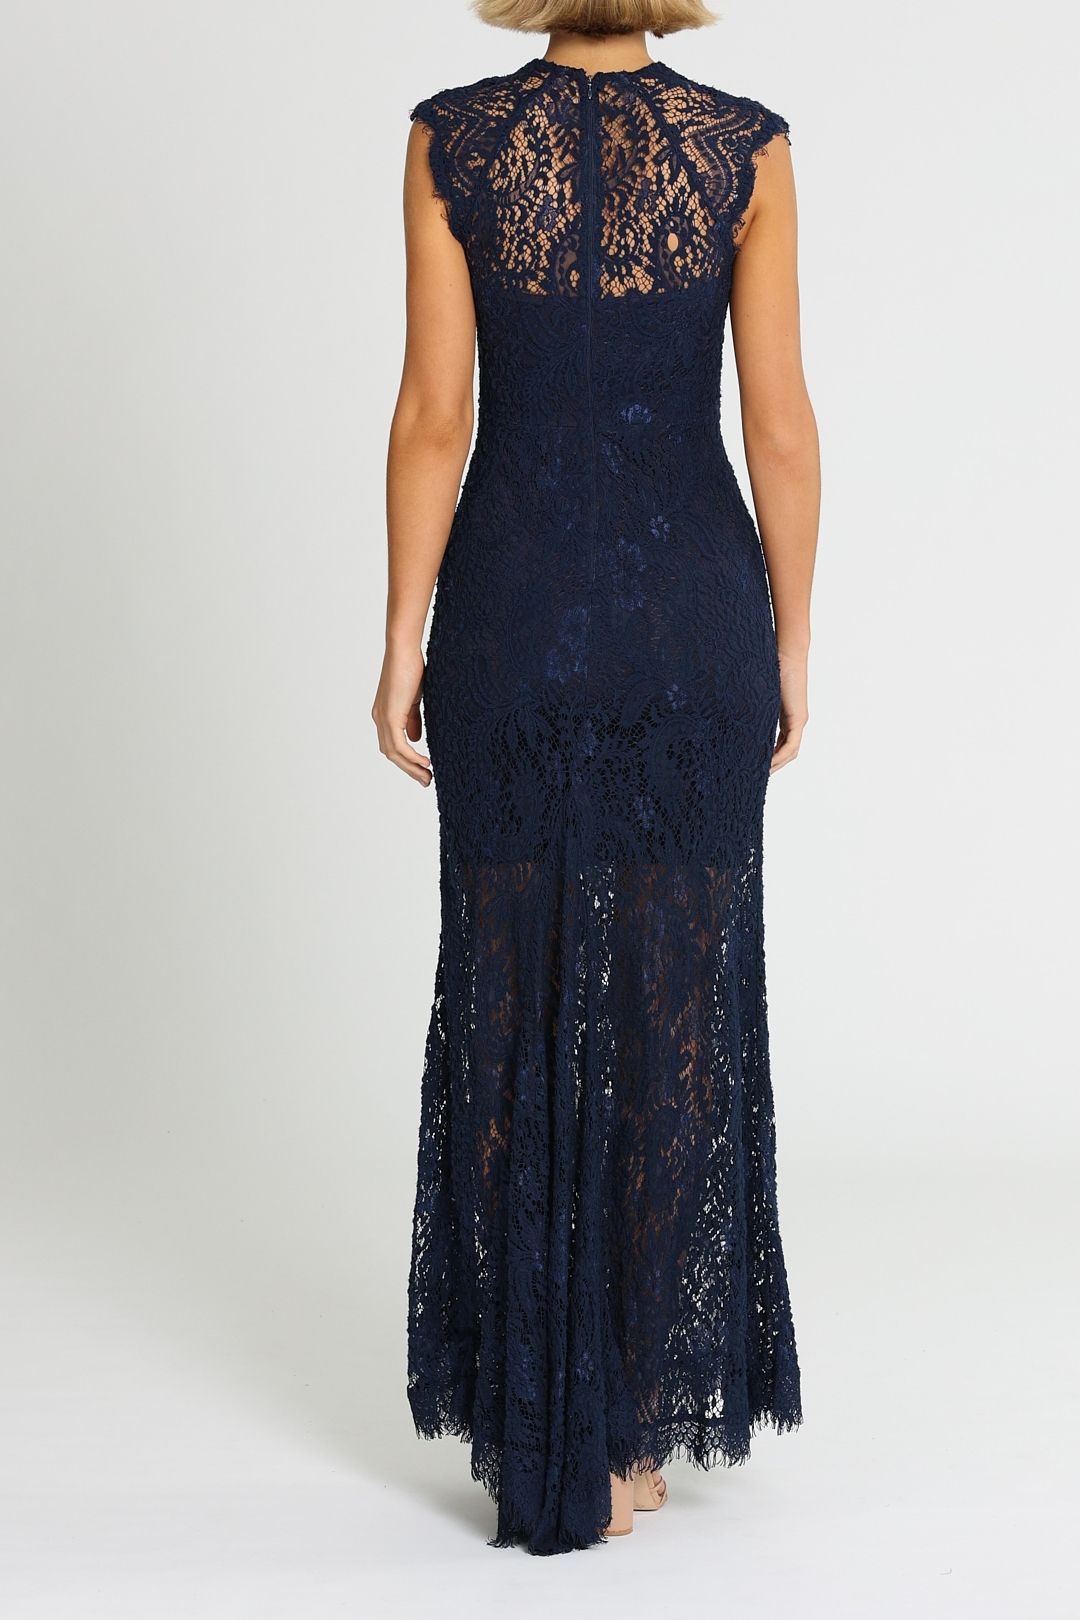 Demi Gown in Navy by Elle Zeitoune for Hire | GlamCorner